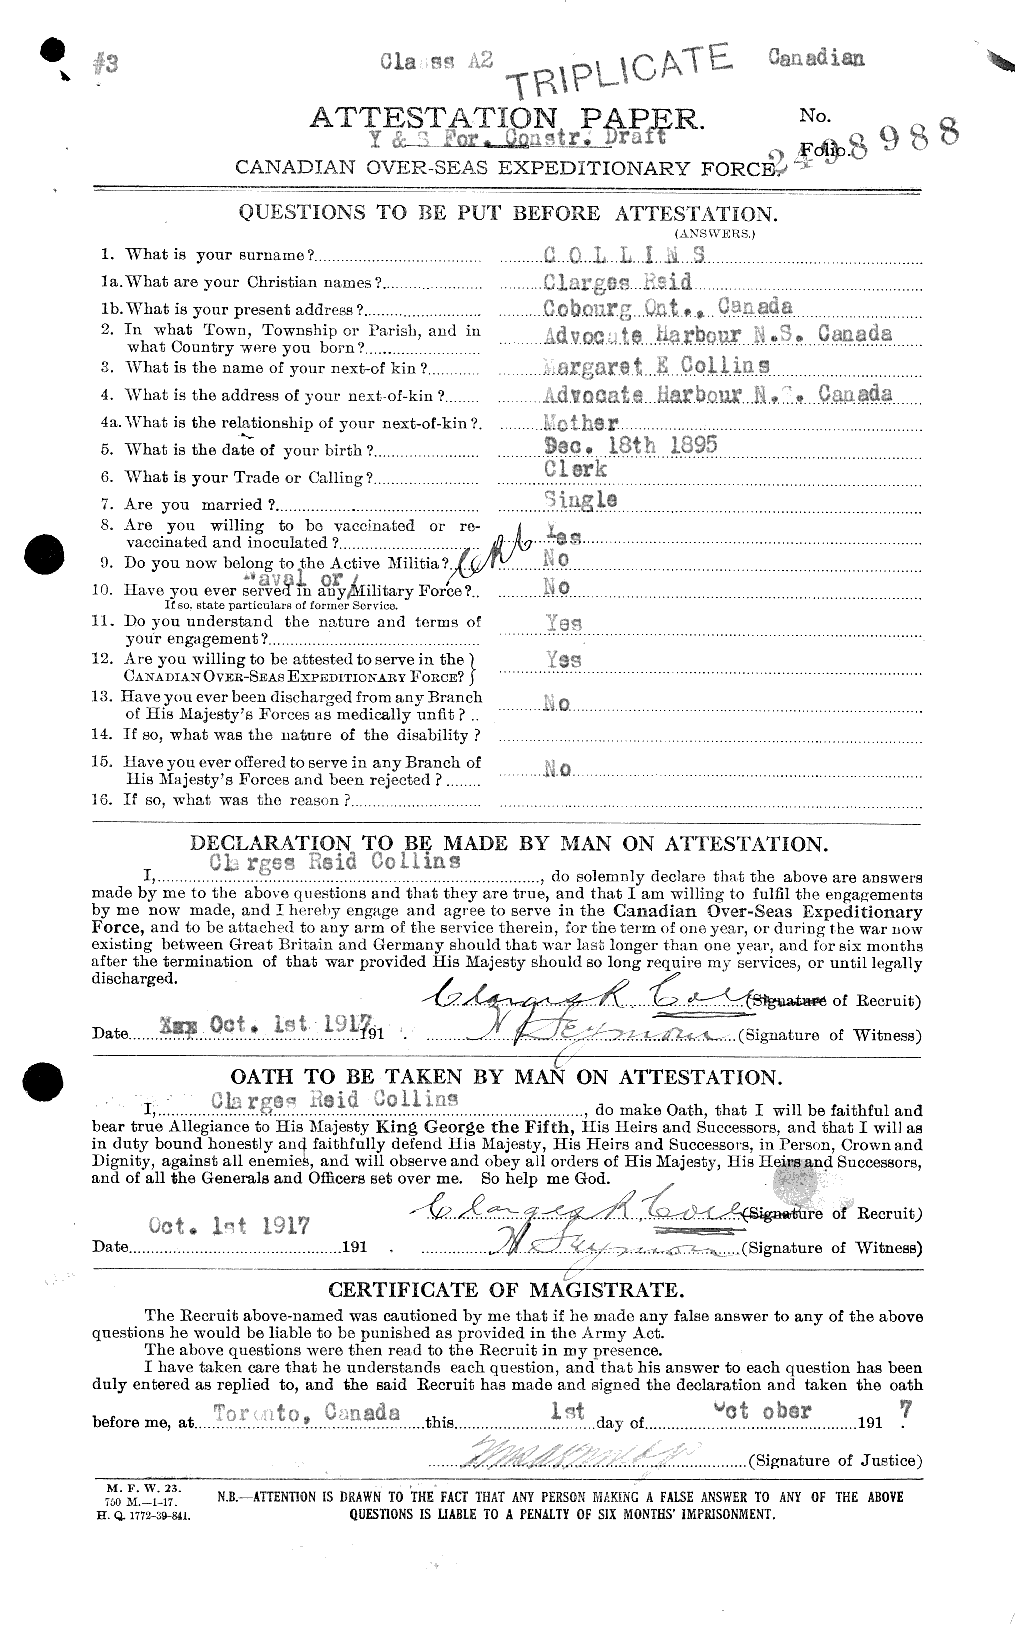 Personnel Records of the First World War - CEF 029052a